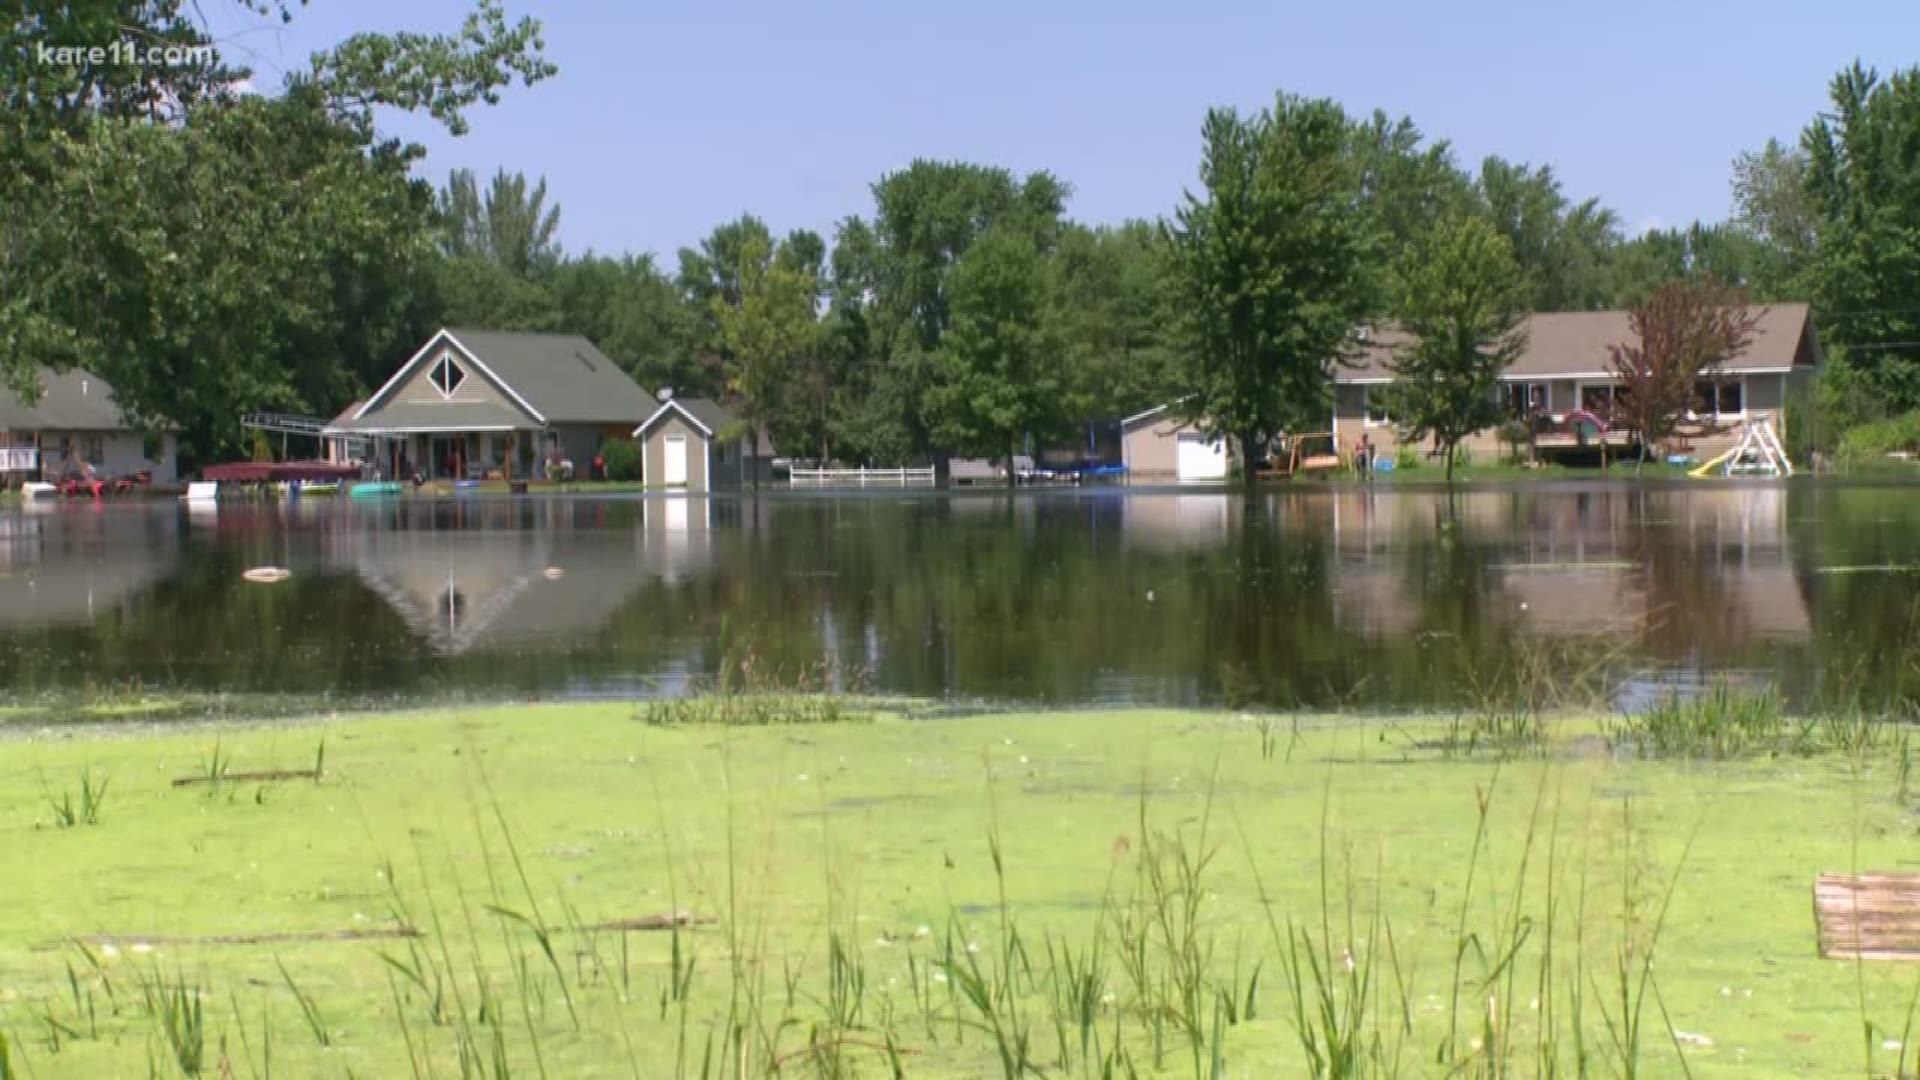 About an hour south of the Twin Cities, it's clear that Waterville doesn't need any more rain. They're dealing with a lot of flooding, and the storm last weekend only made the problem worse.